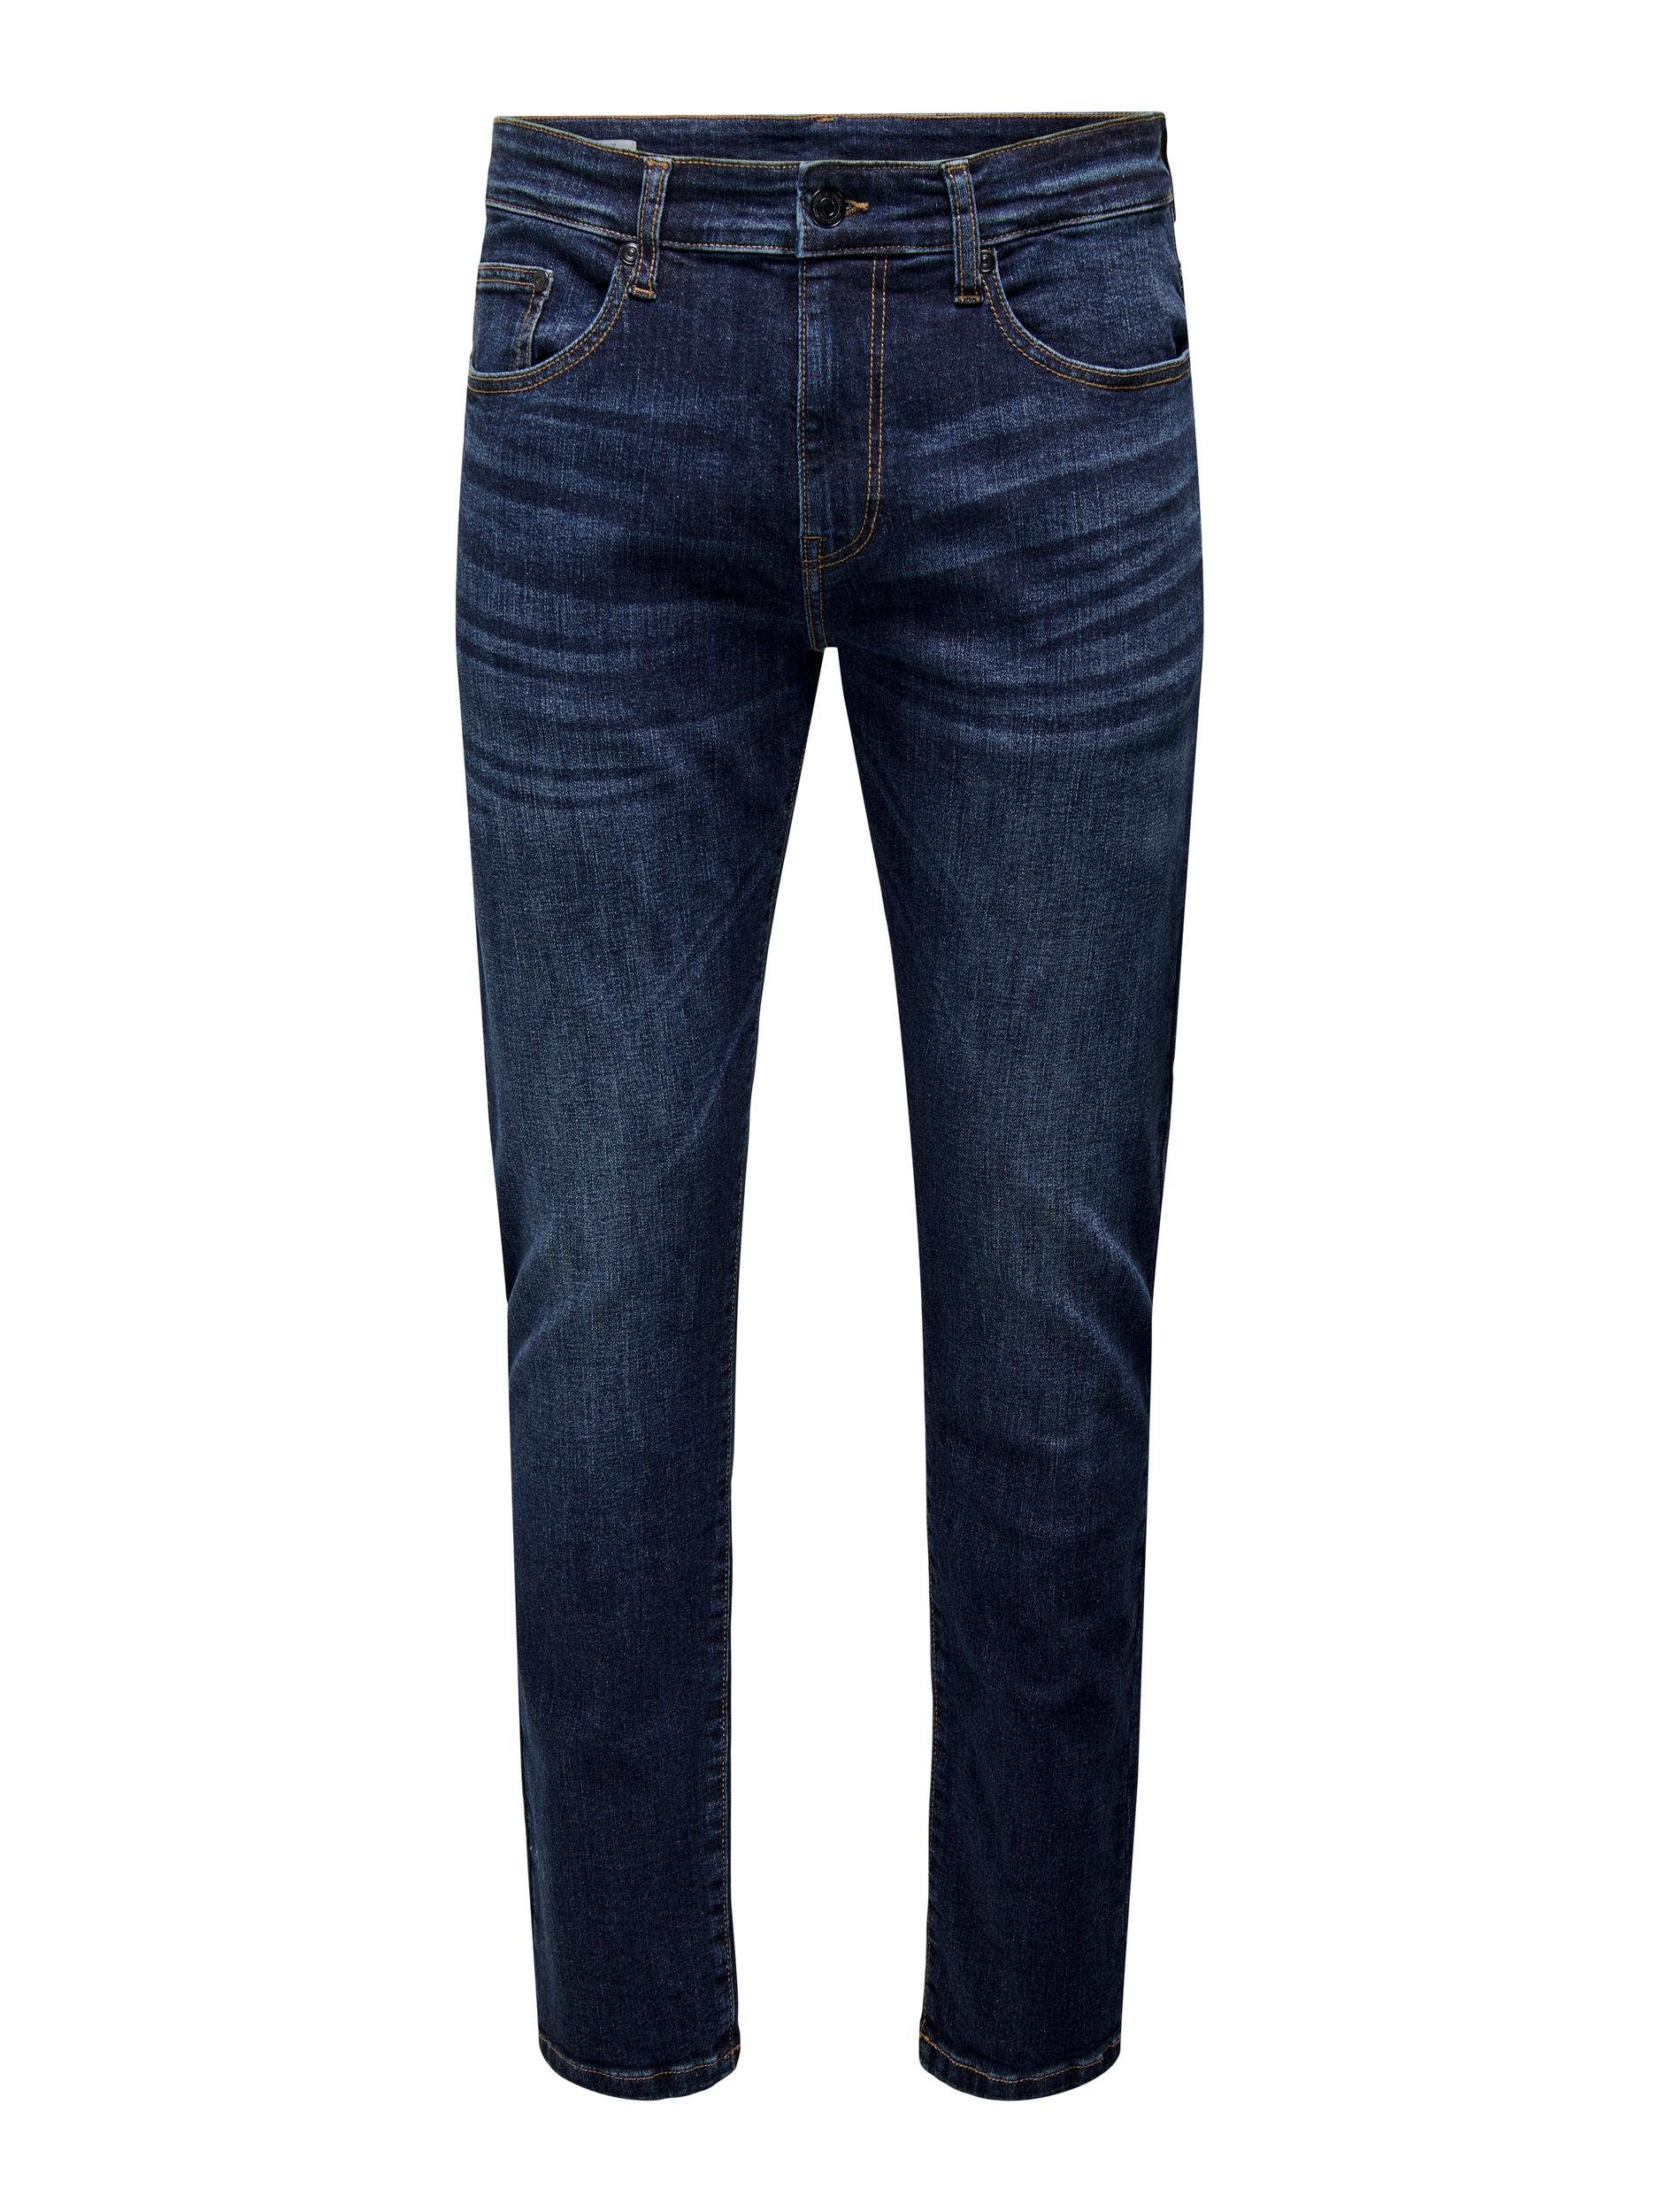 ONSWEFT JEANS DNM BLUE NOOS Straight-Jeans SONS 6752 & ONLY REG.DK.